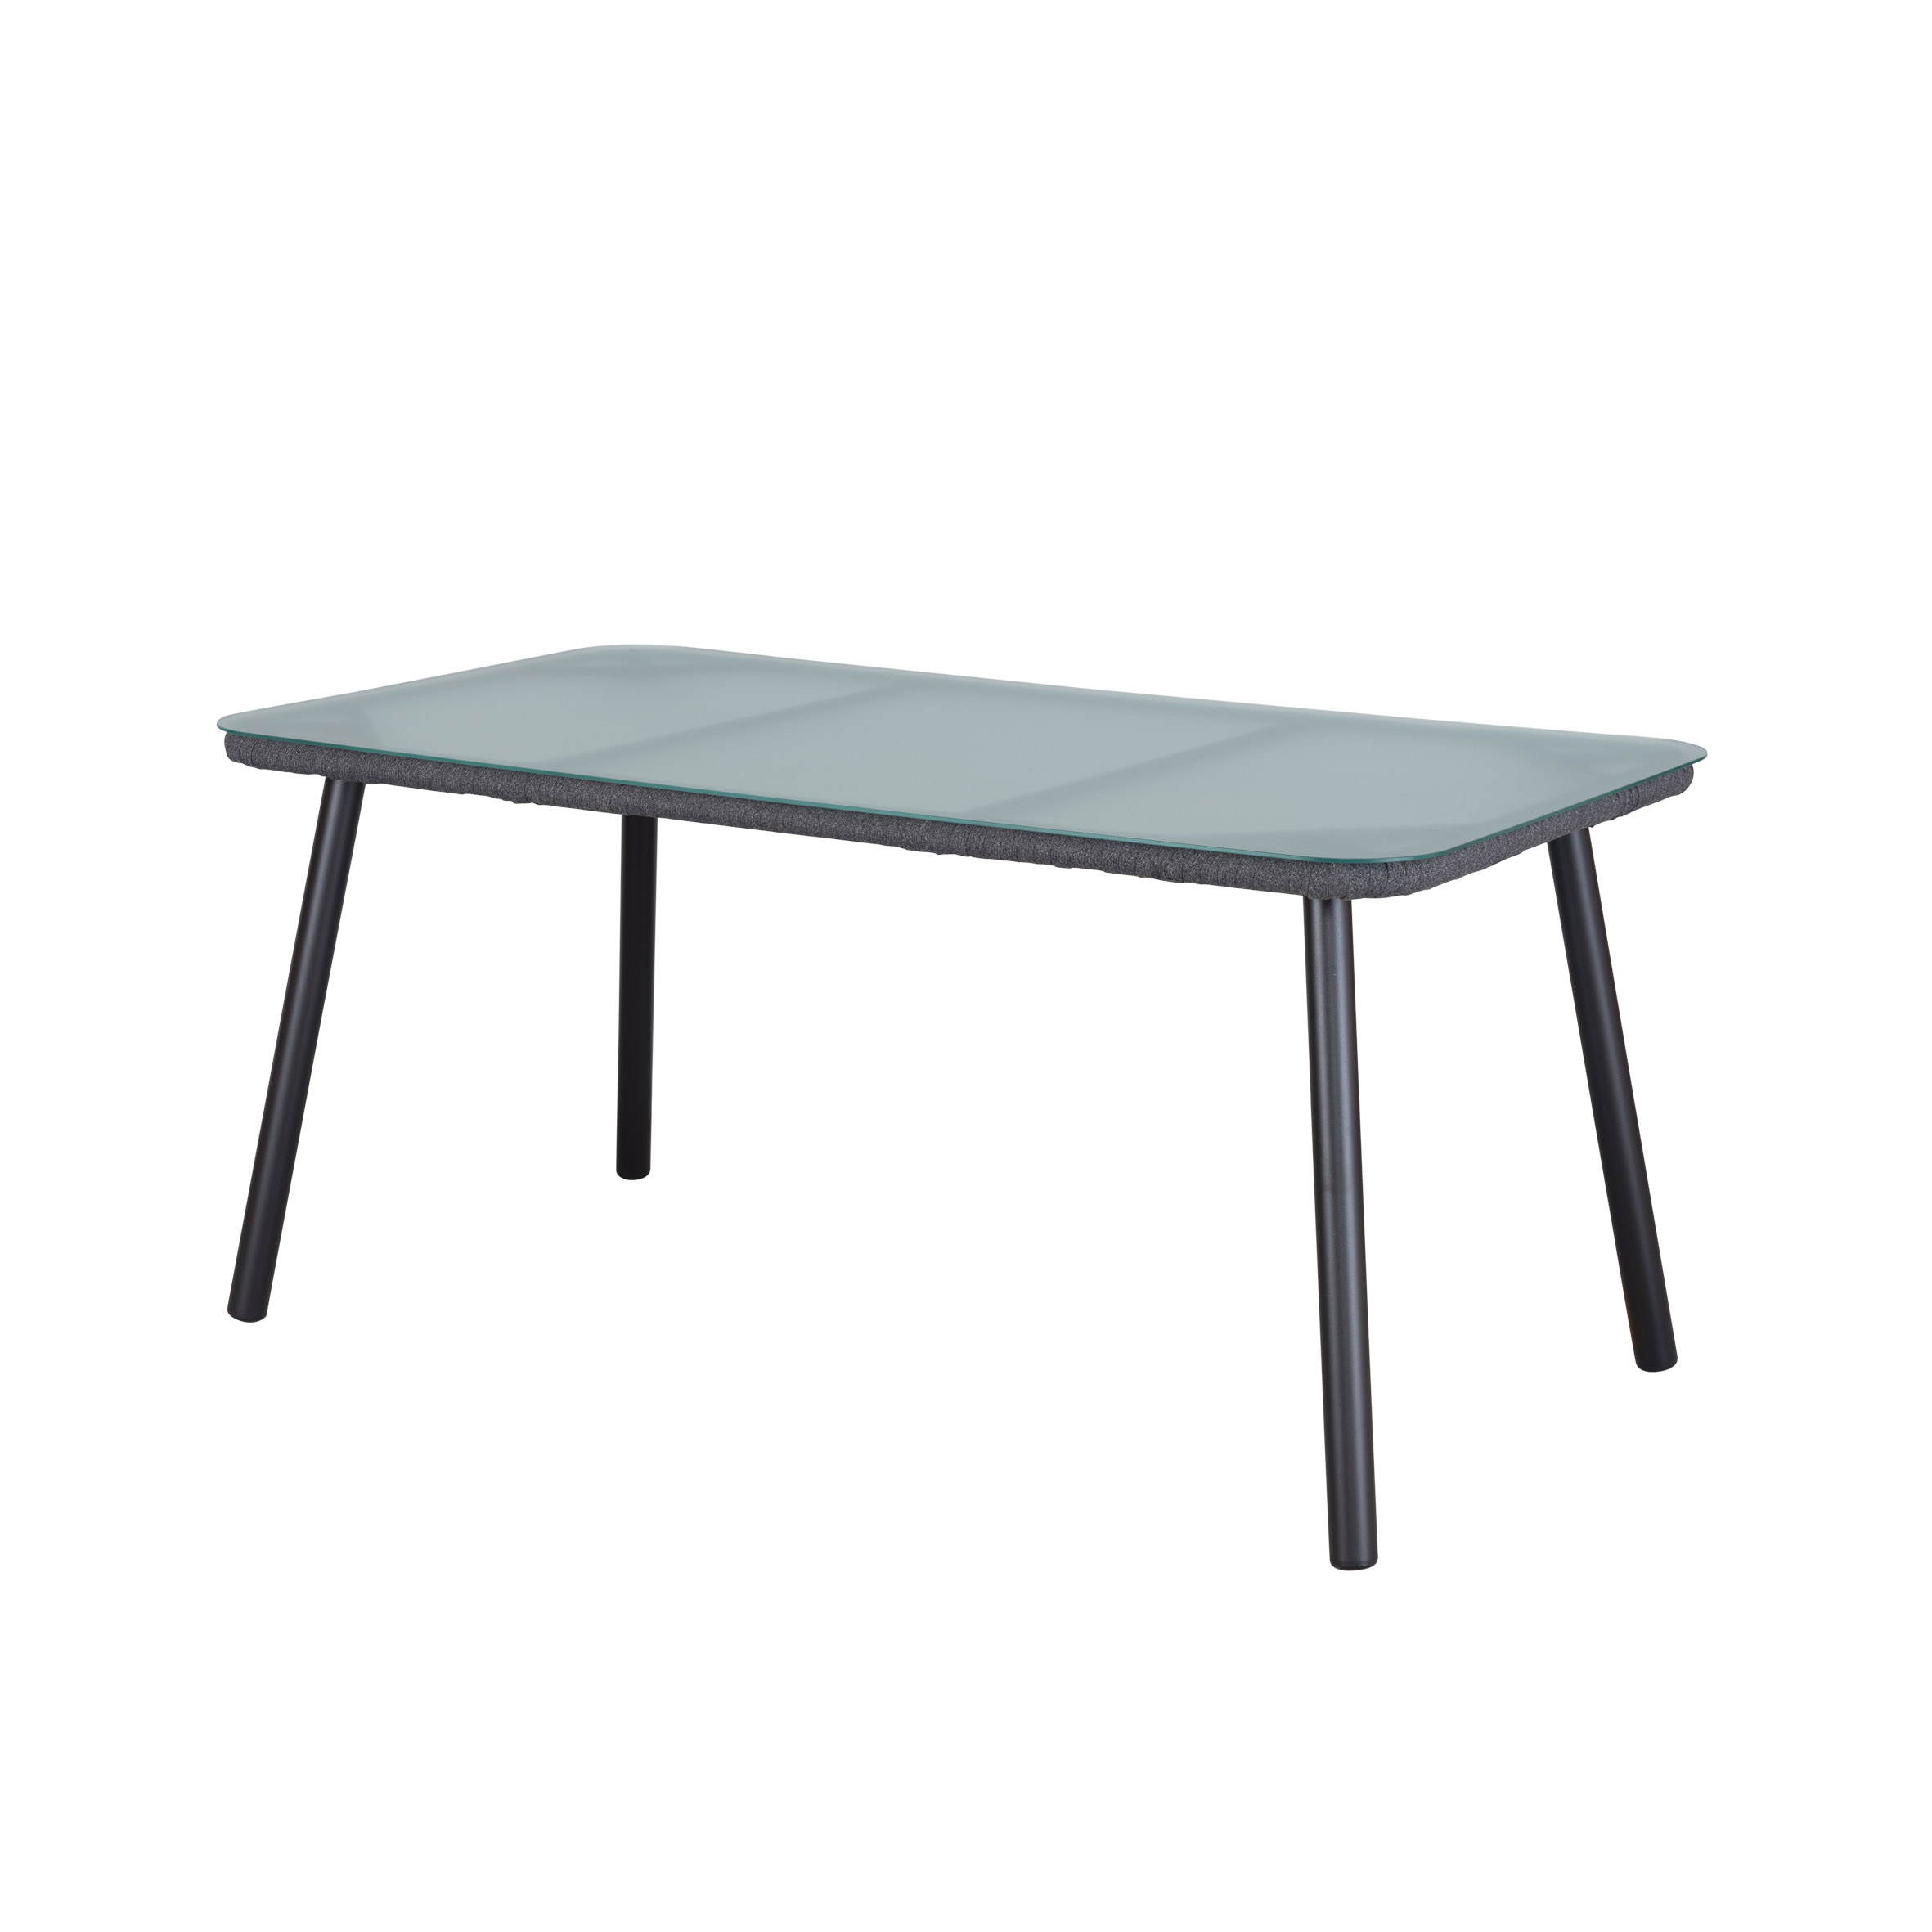 Lincoln rope rectangle table S5